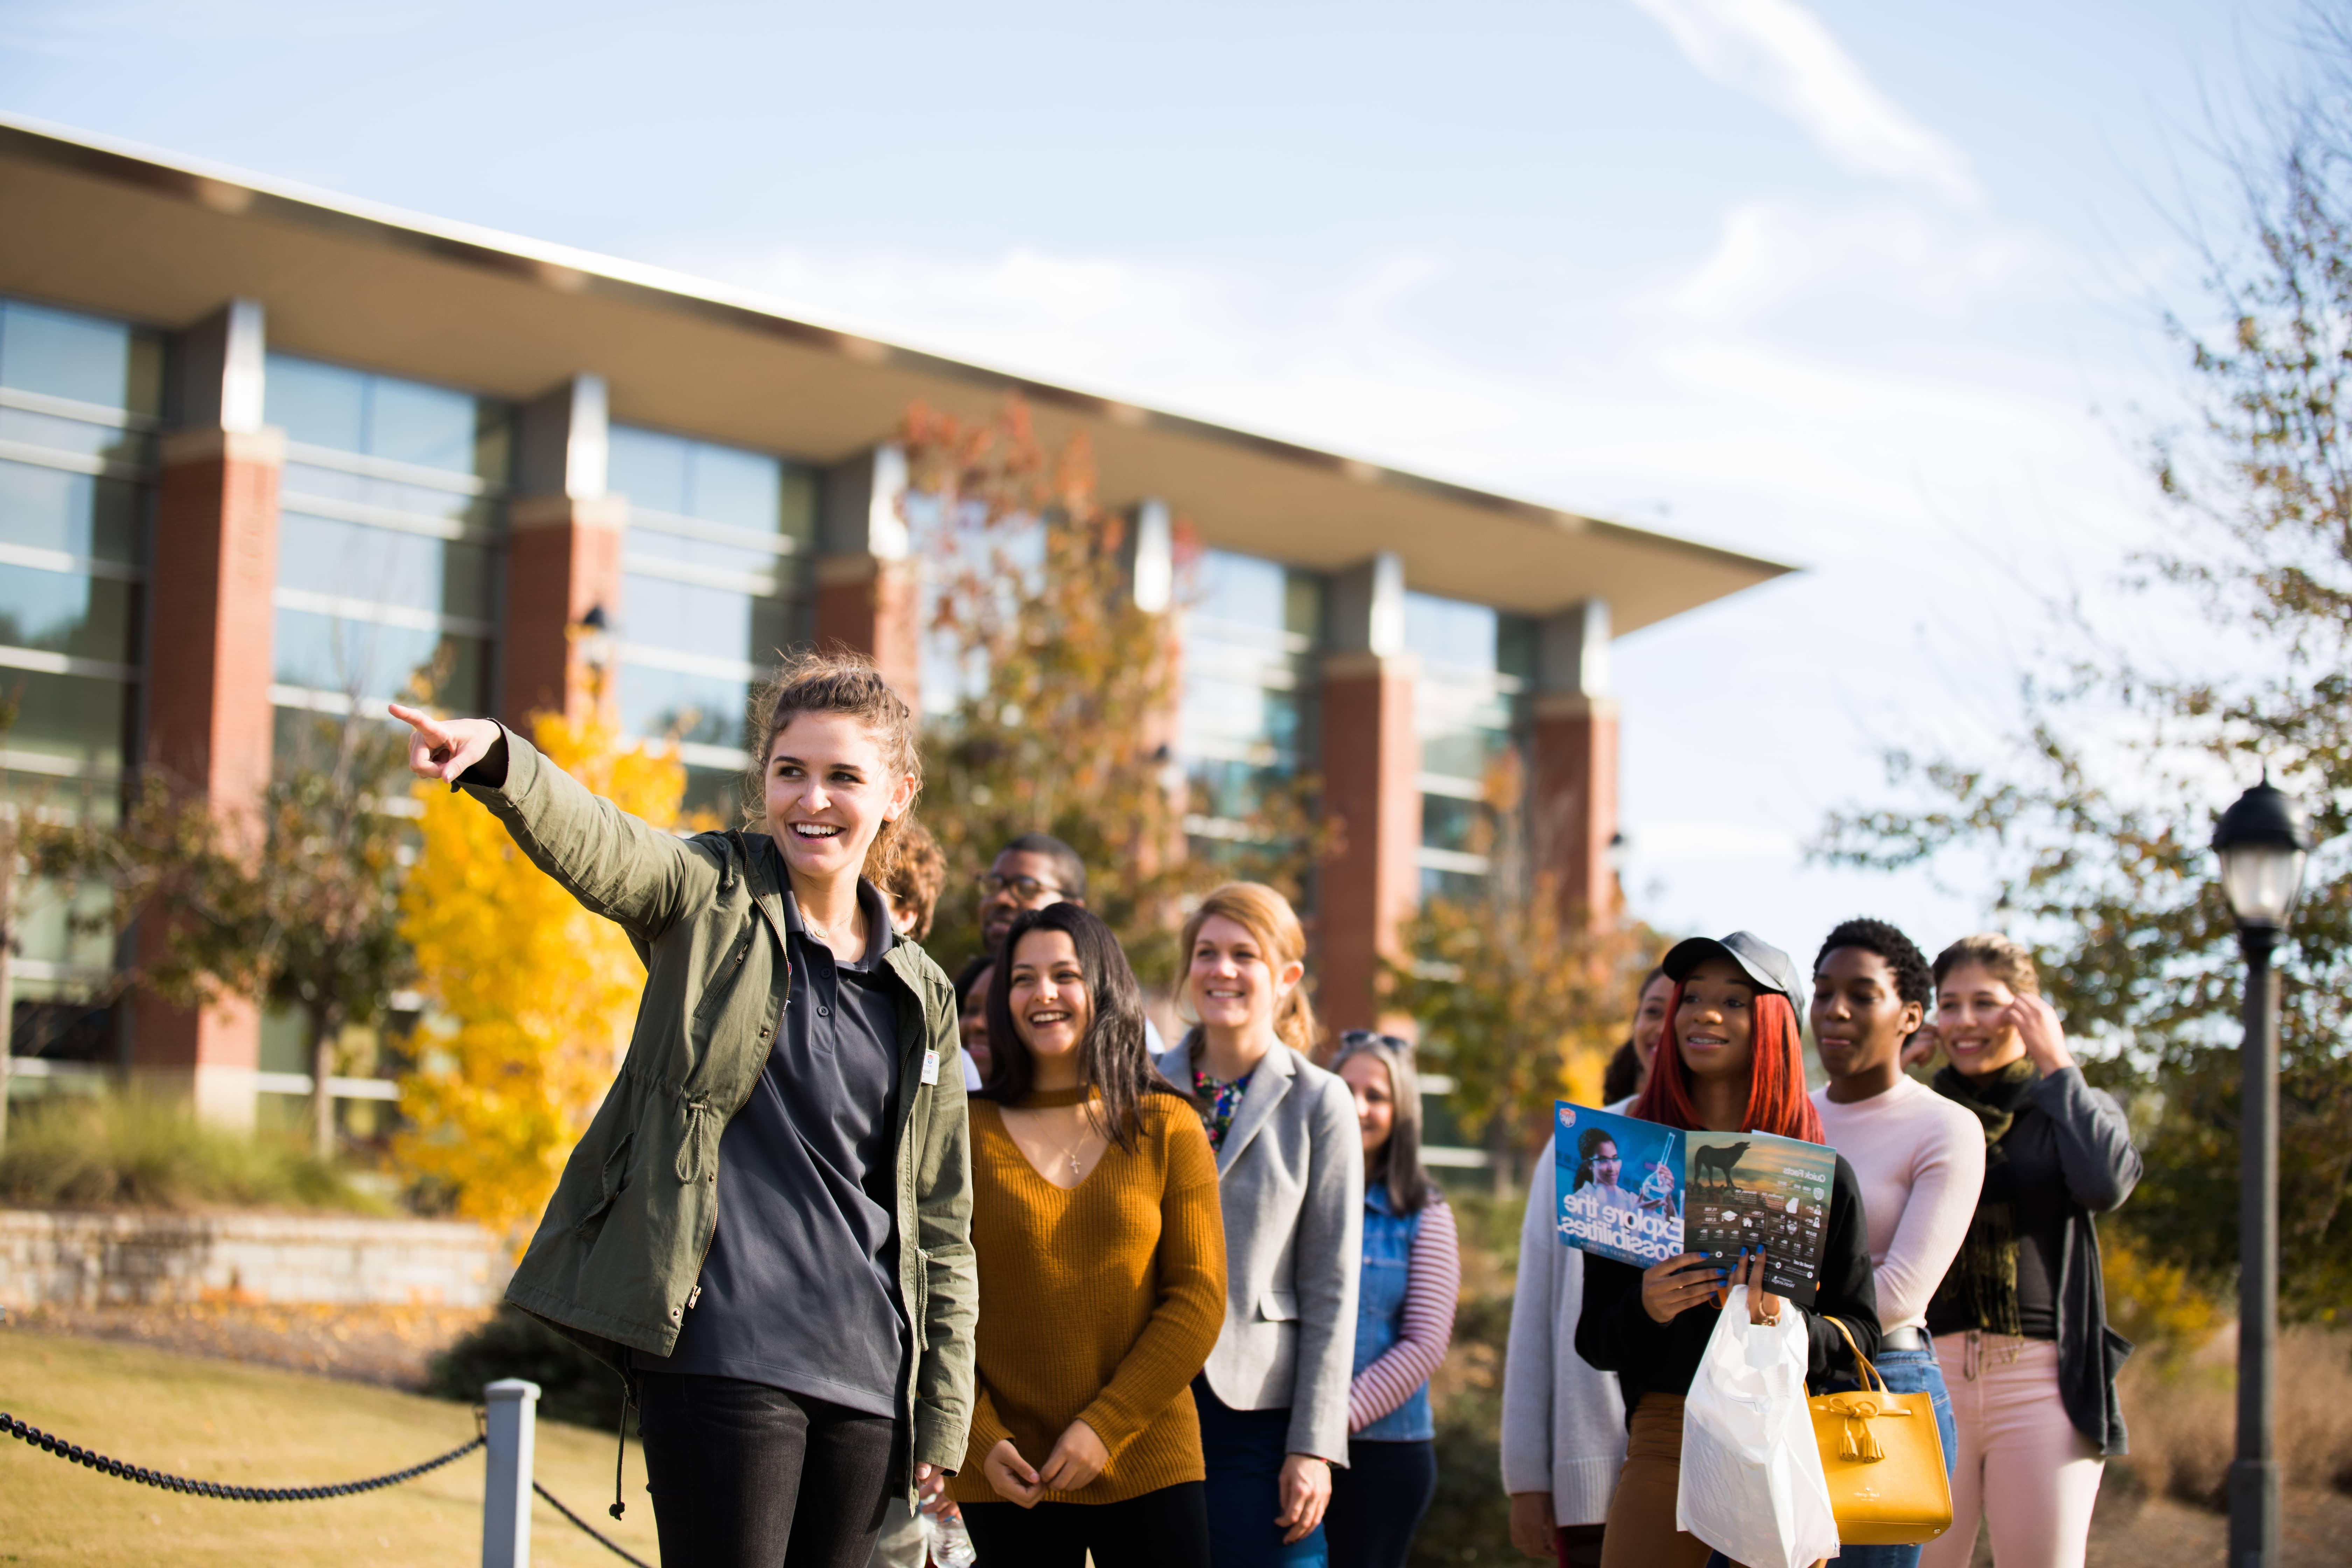 Students walking and smiling during a tour through campus.